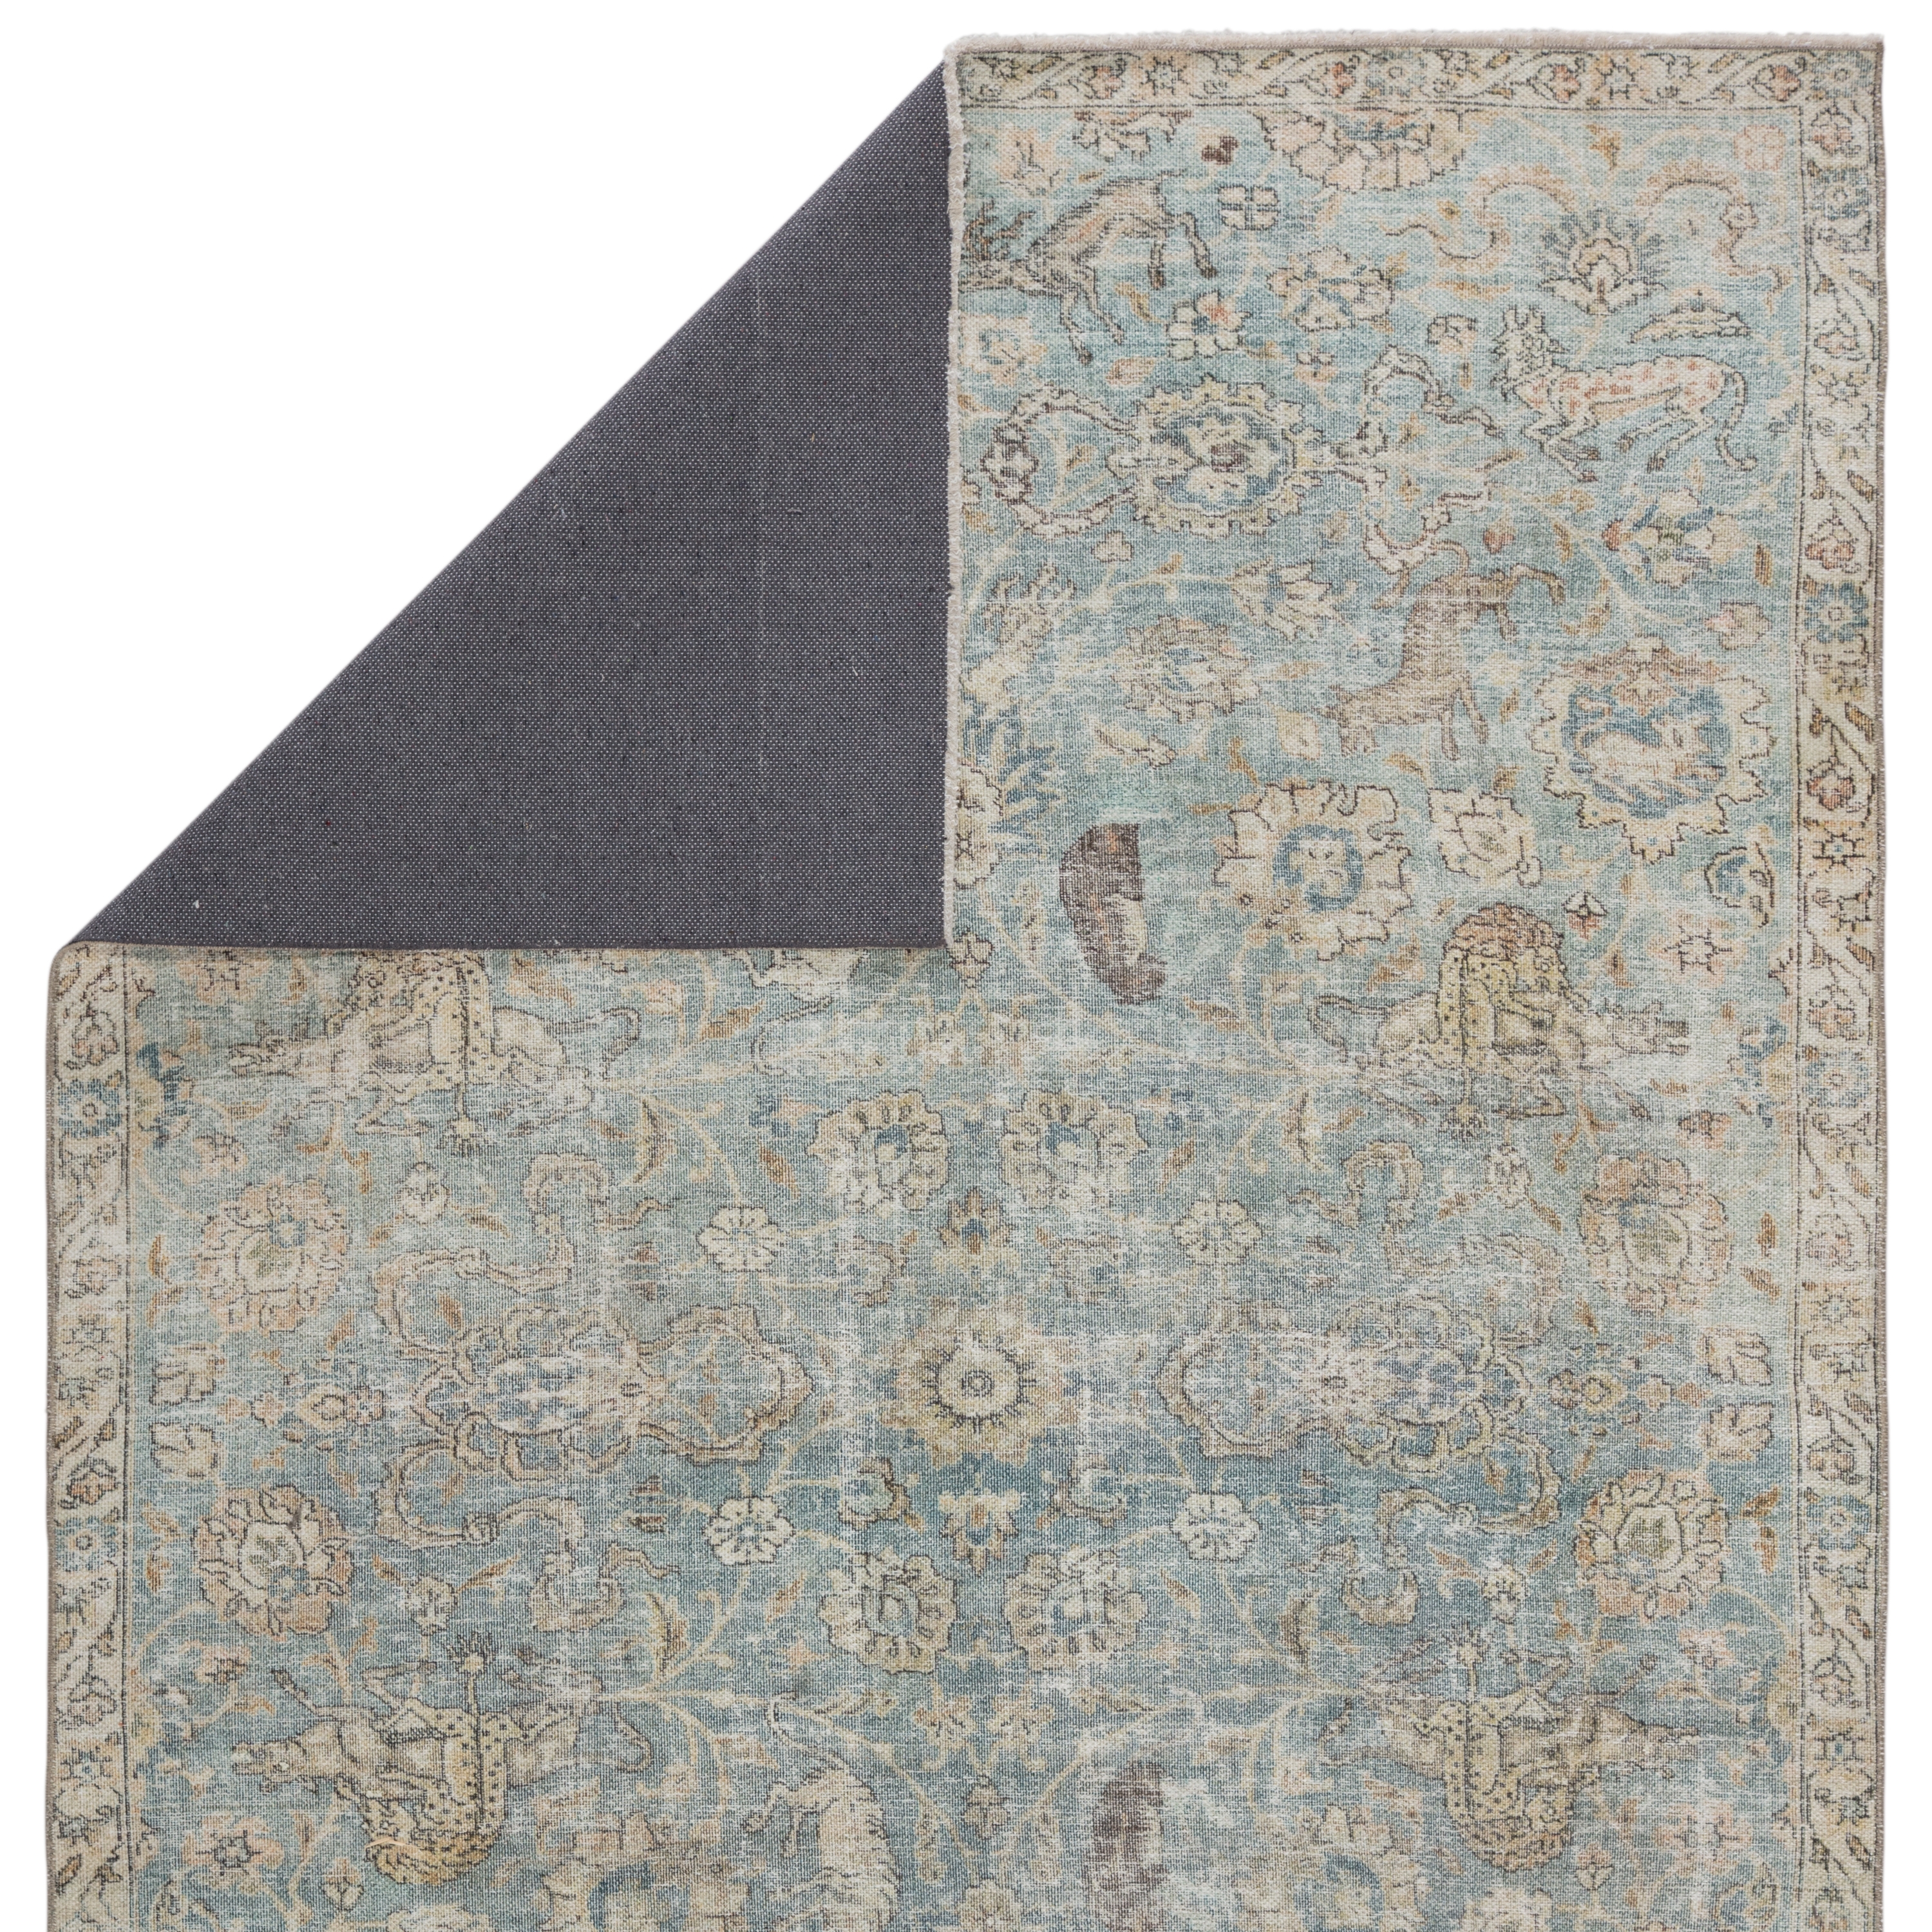 Stag Oriental Teal/ Gold Area Rug (6'X9') - Image 2